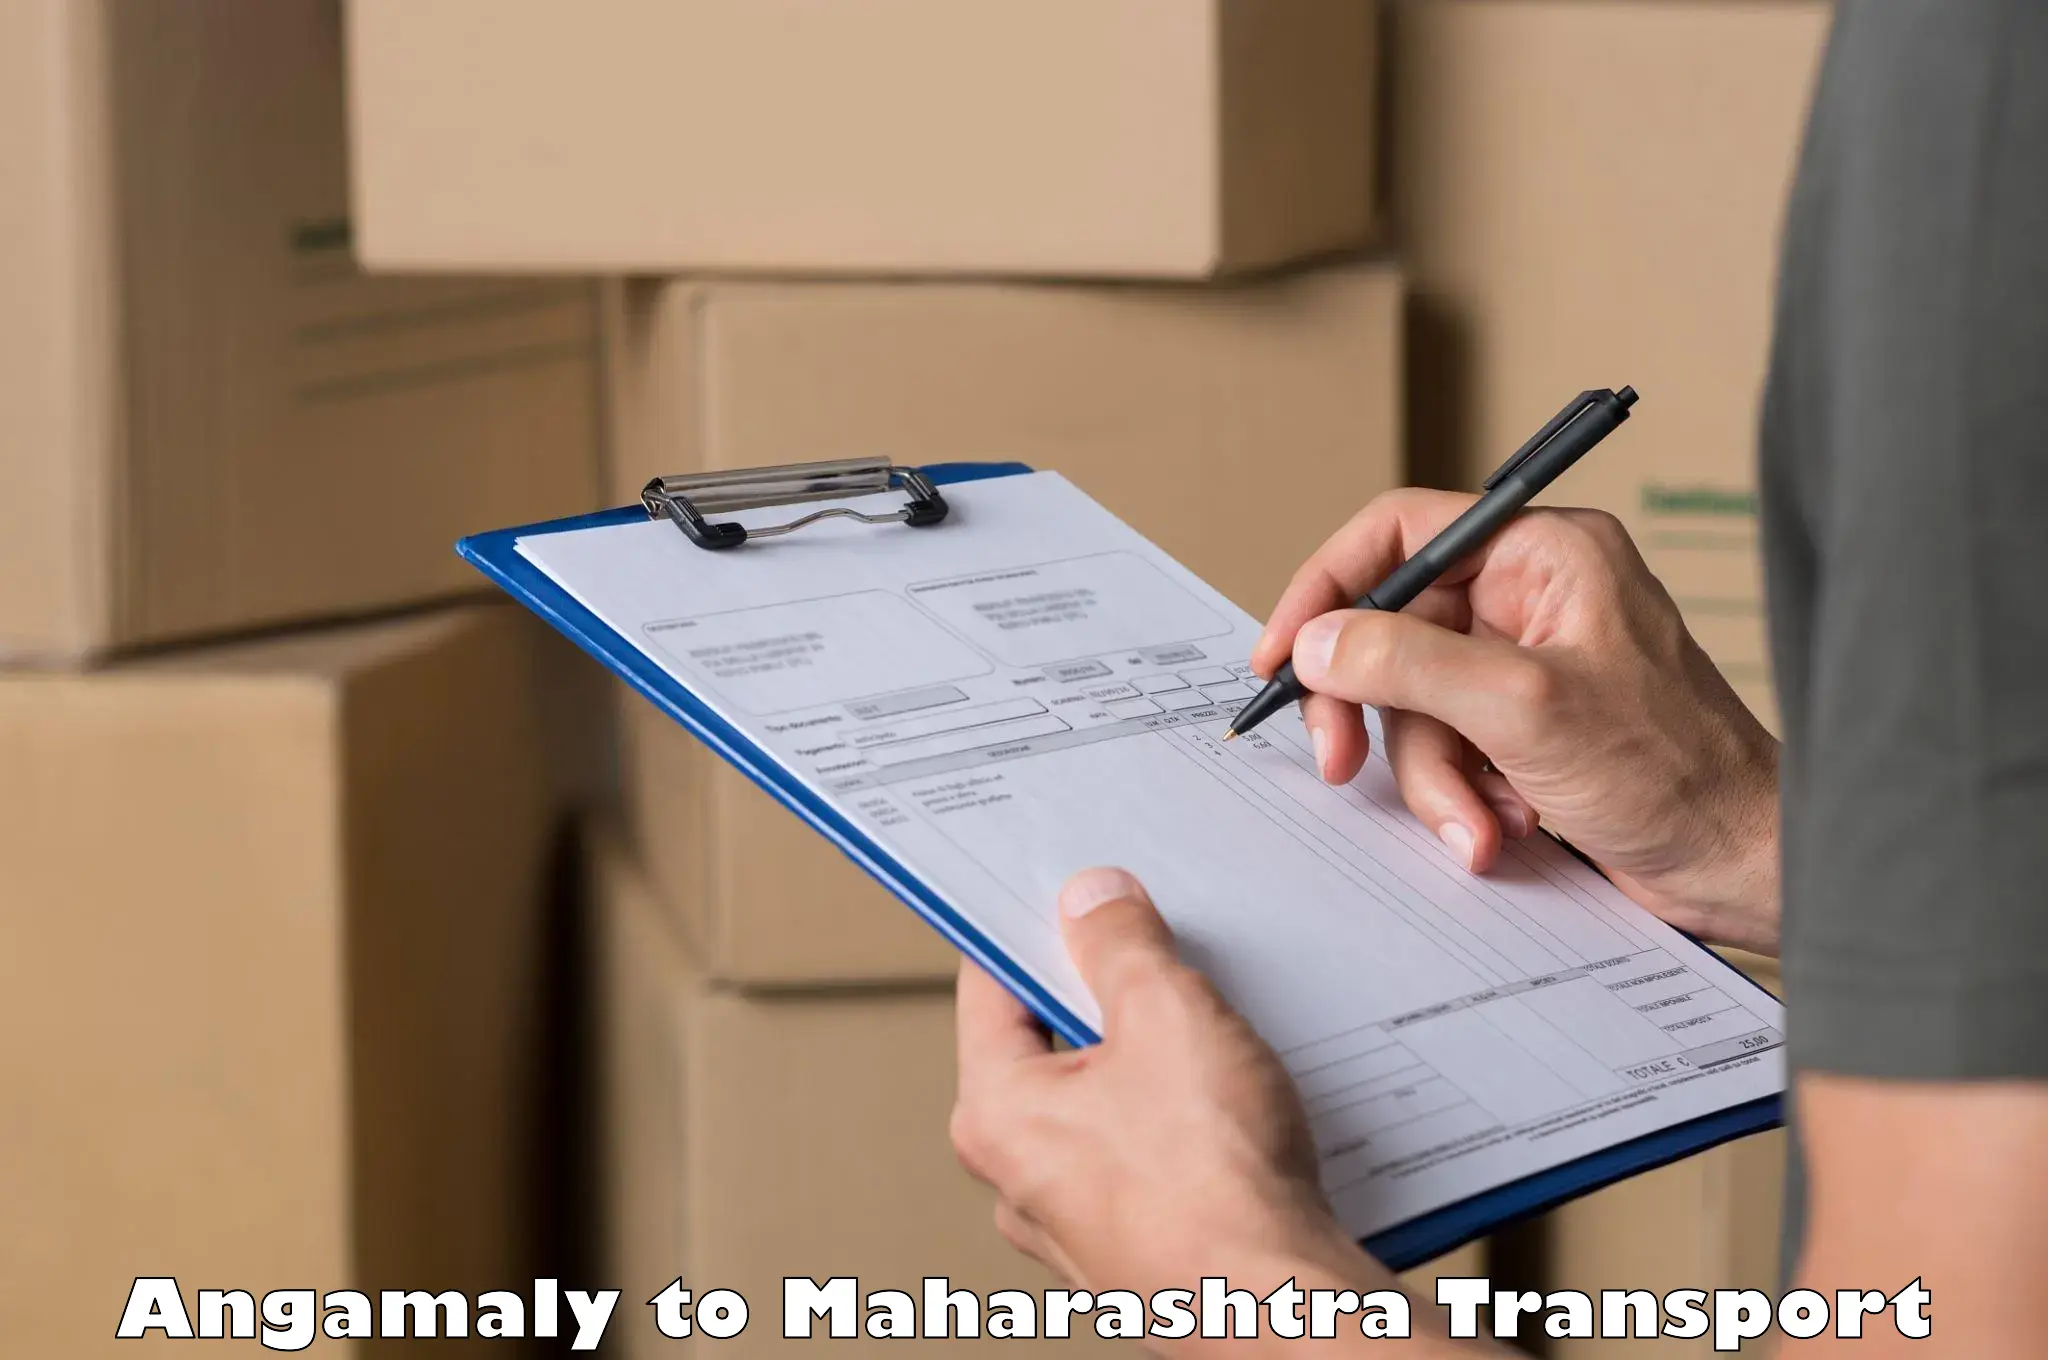 Truck transport companies in India Angamaly to Sangameshwar